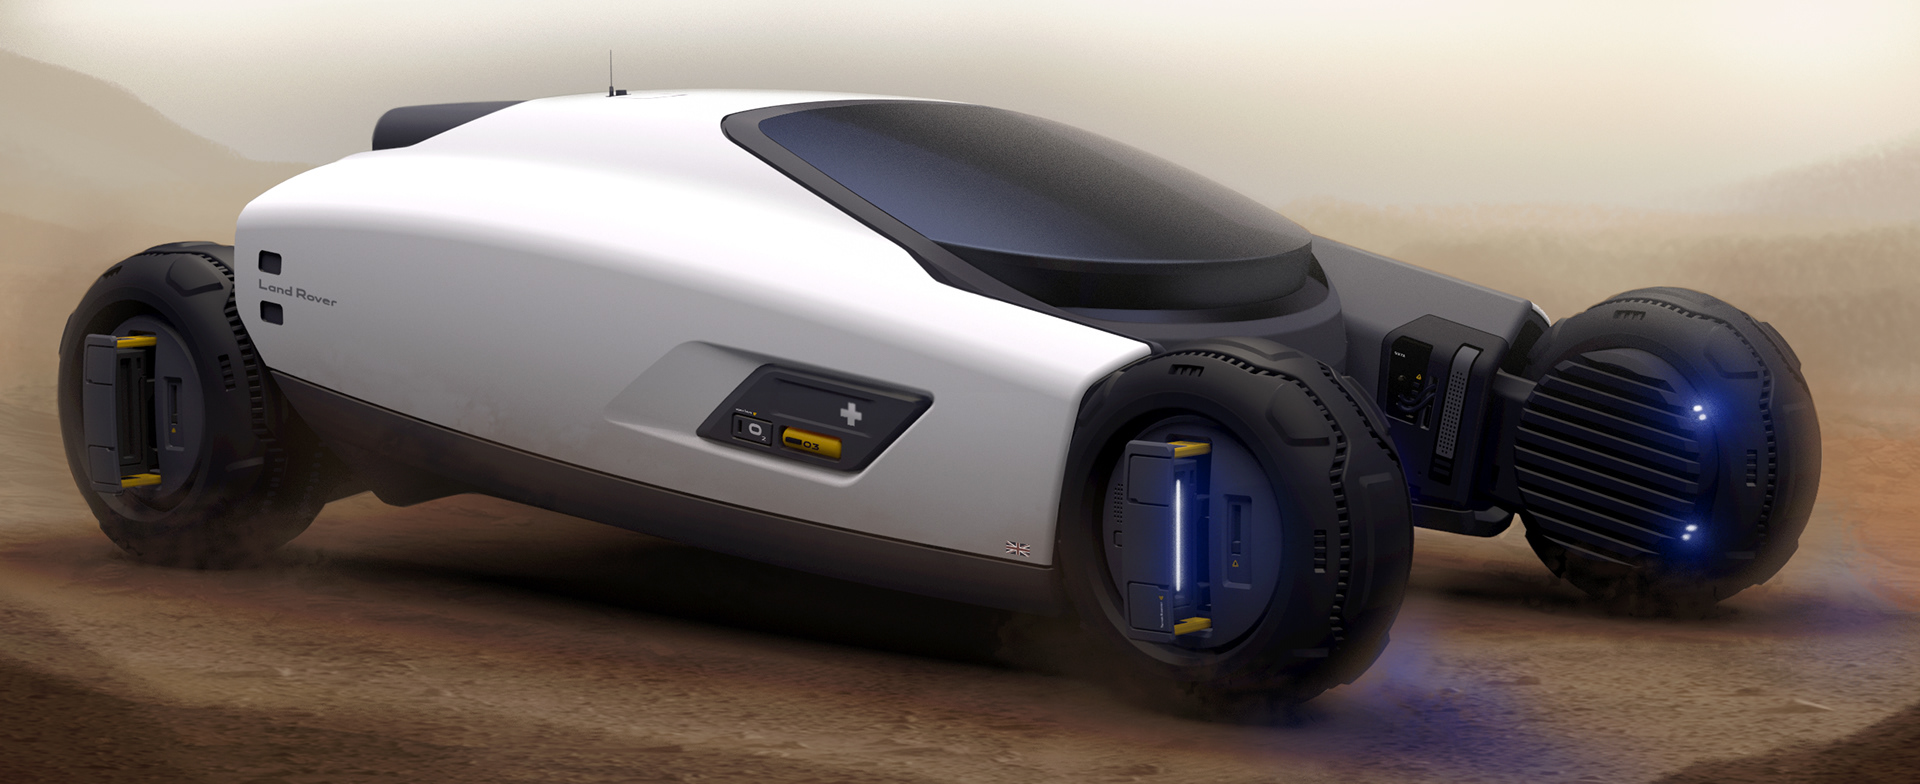 If Land Rover Built A Vehicle To Explore Mars, It Could Look Like This ...